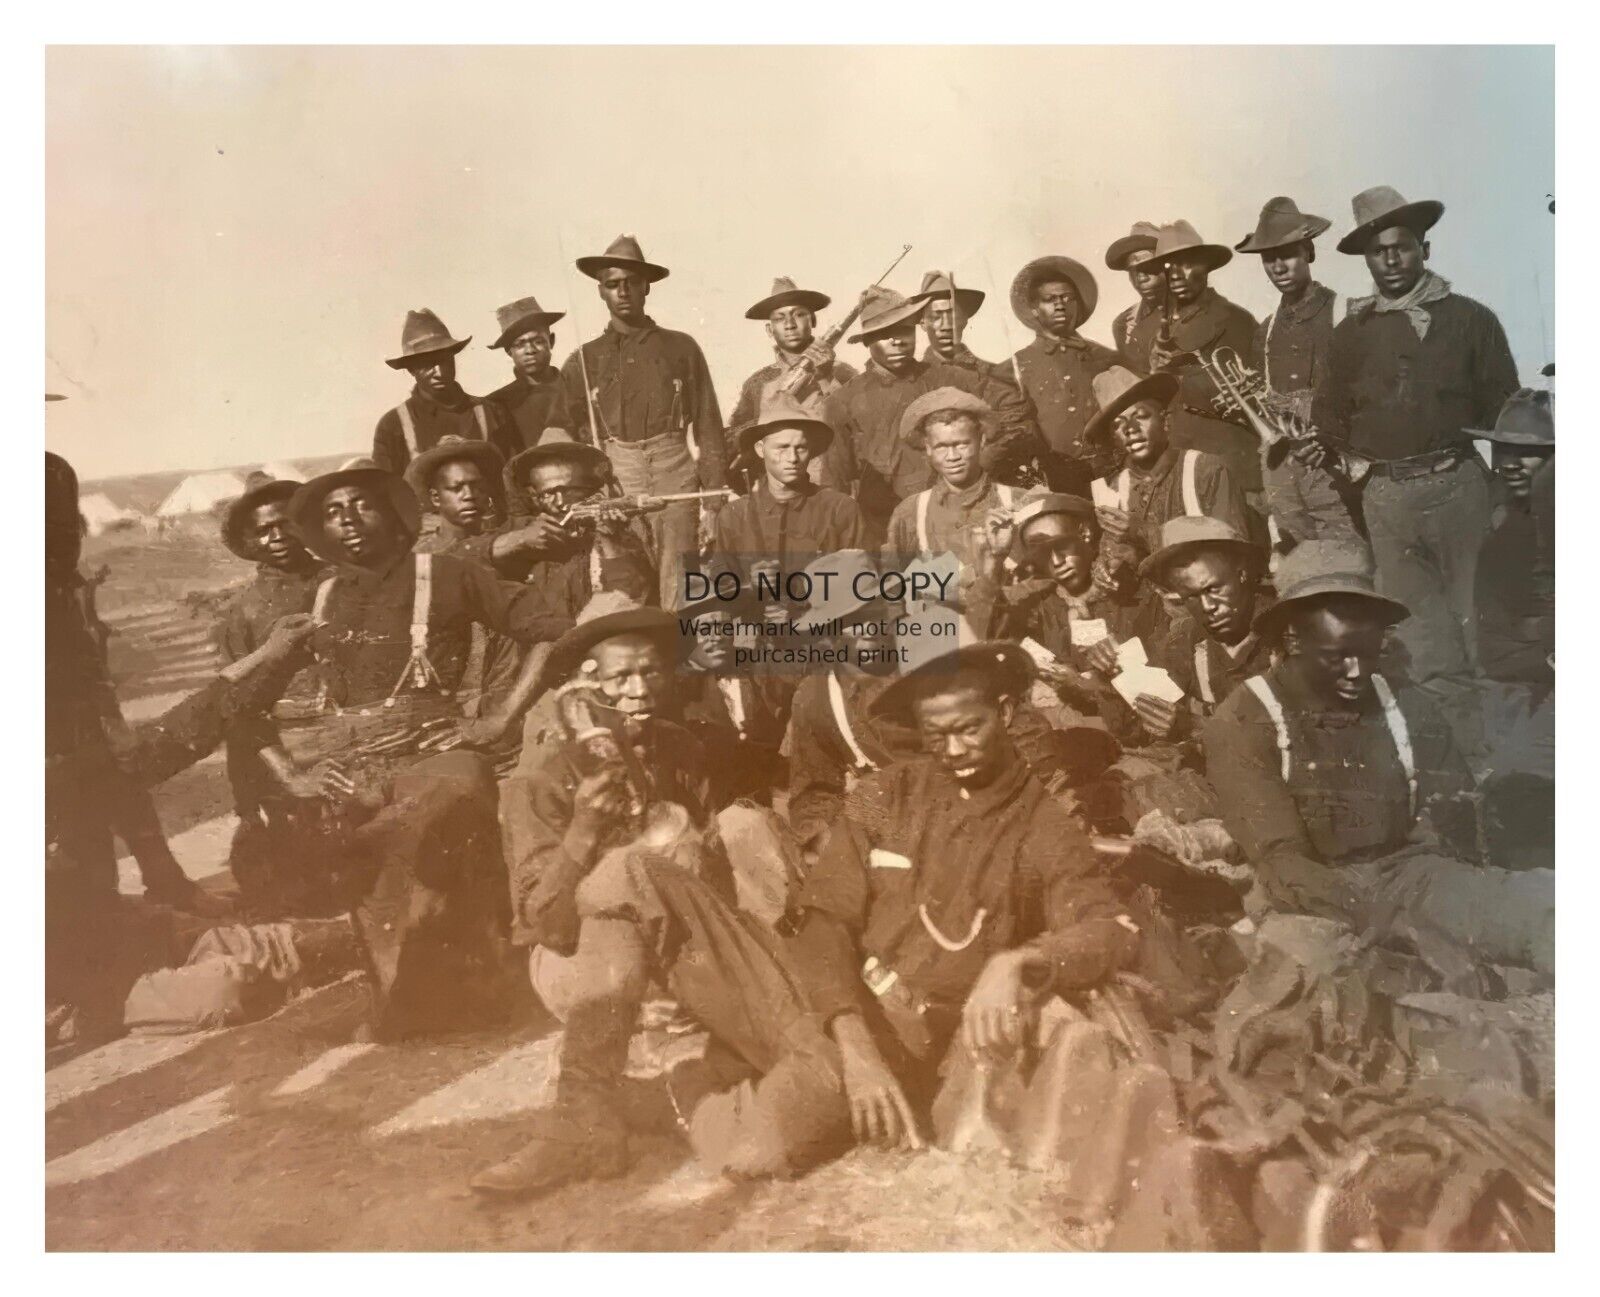 BUFFALO AFRICAN AMERICAN SOLDIERS AMERICAN FRONTIER HISTORICAL 8X10 PHOTO